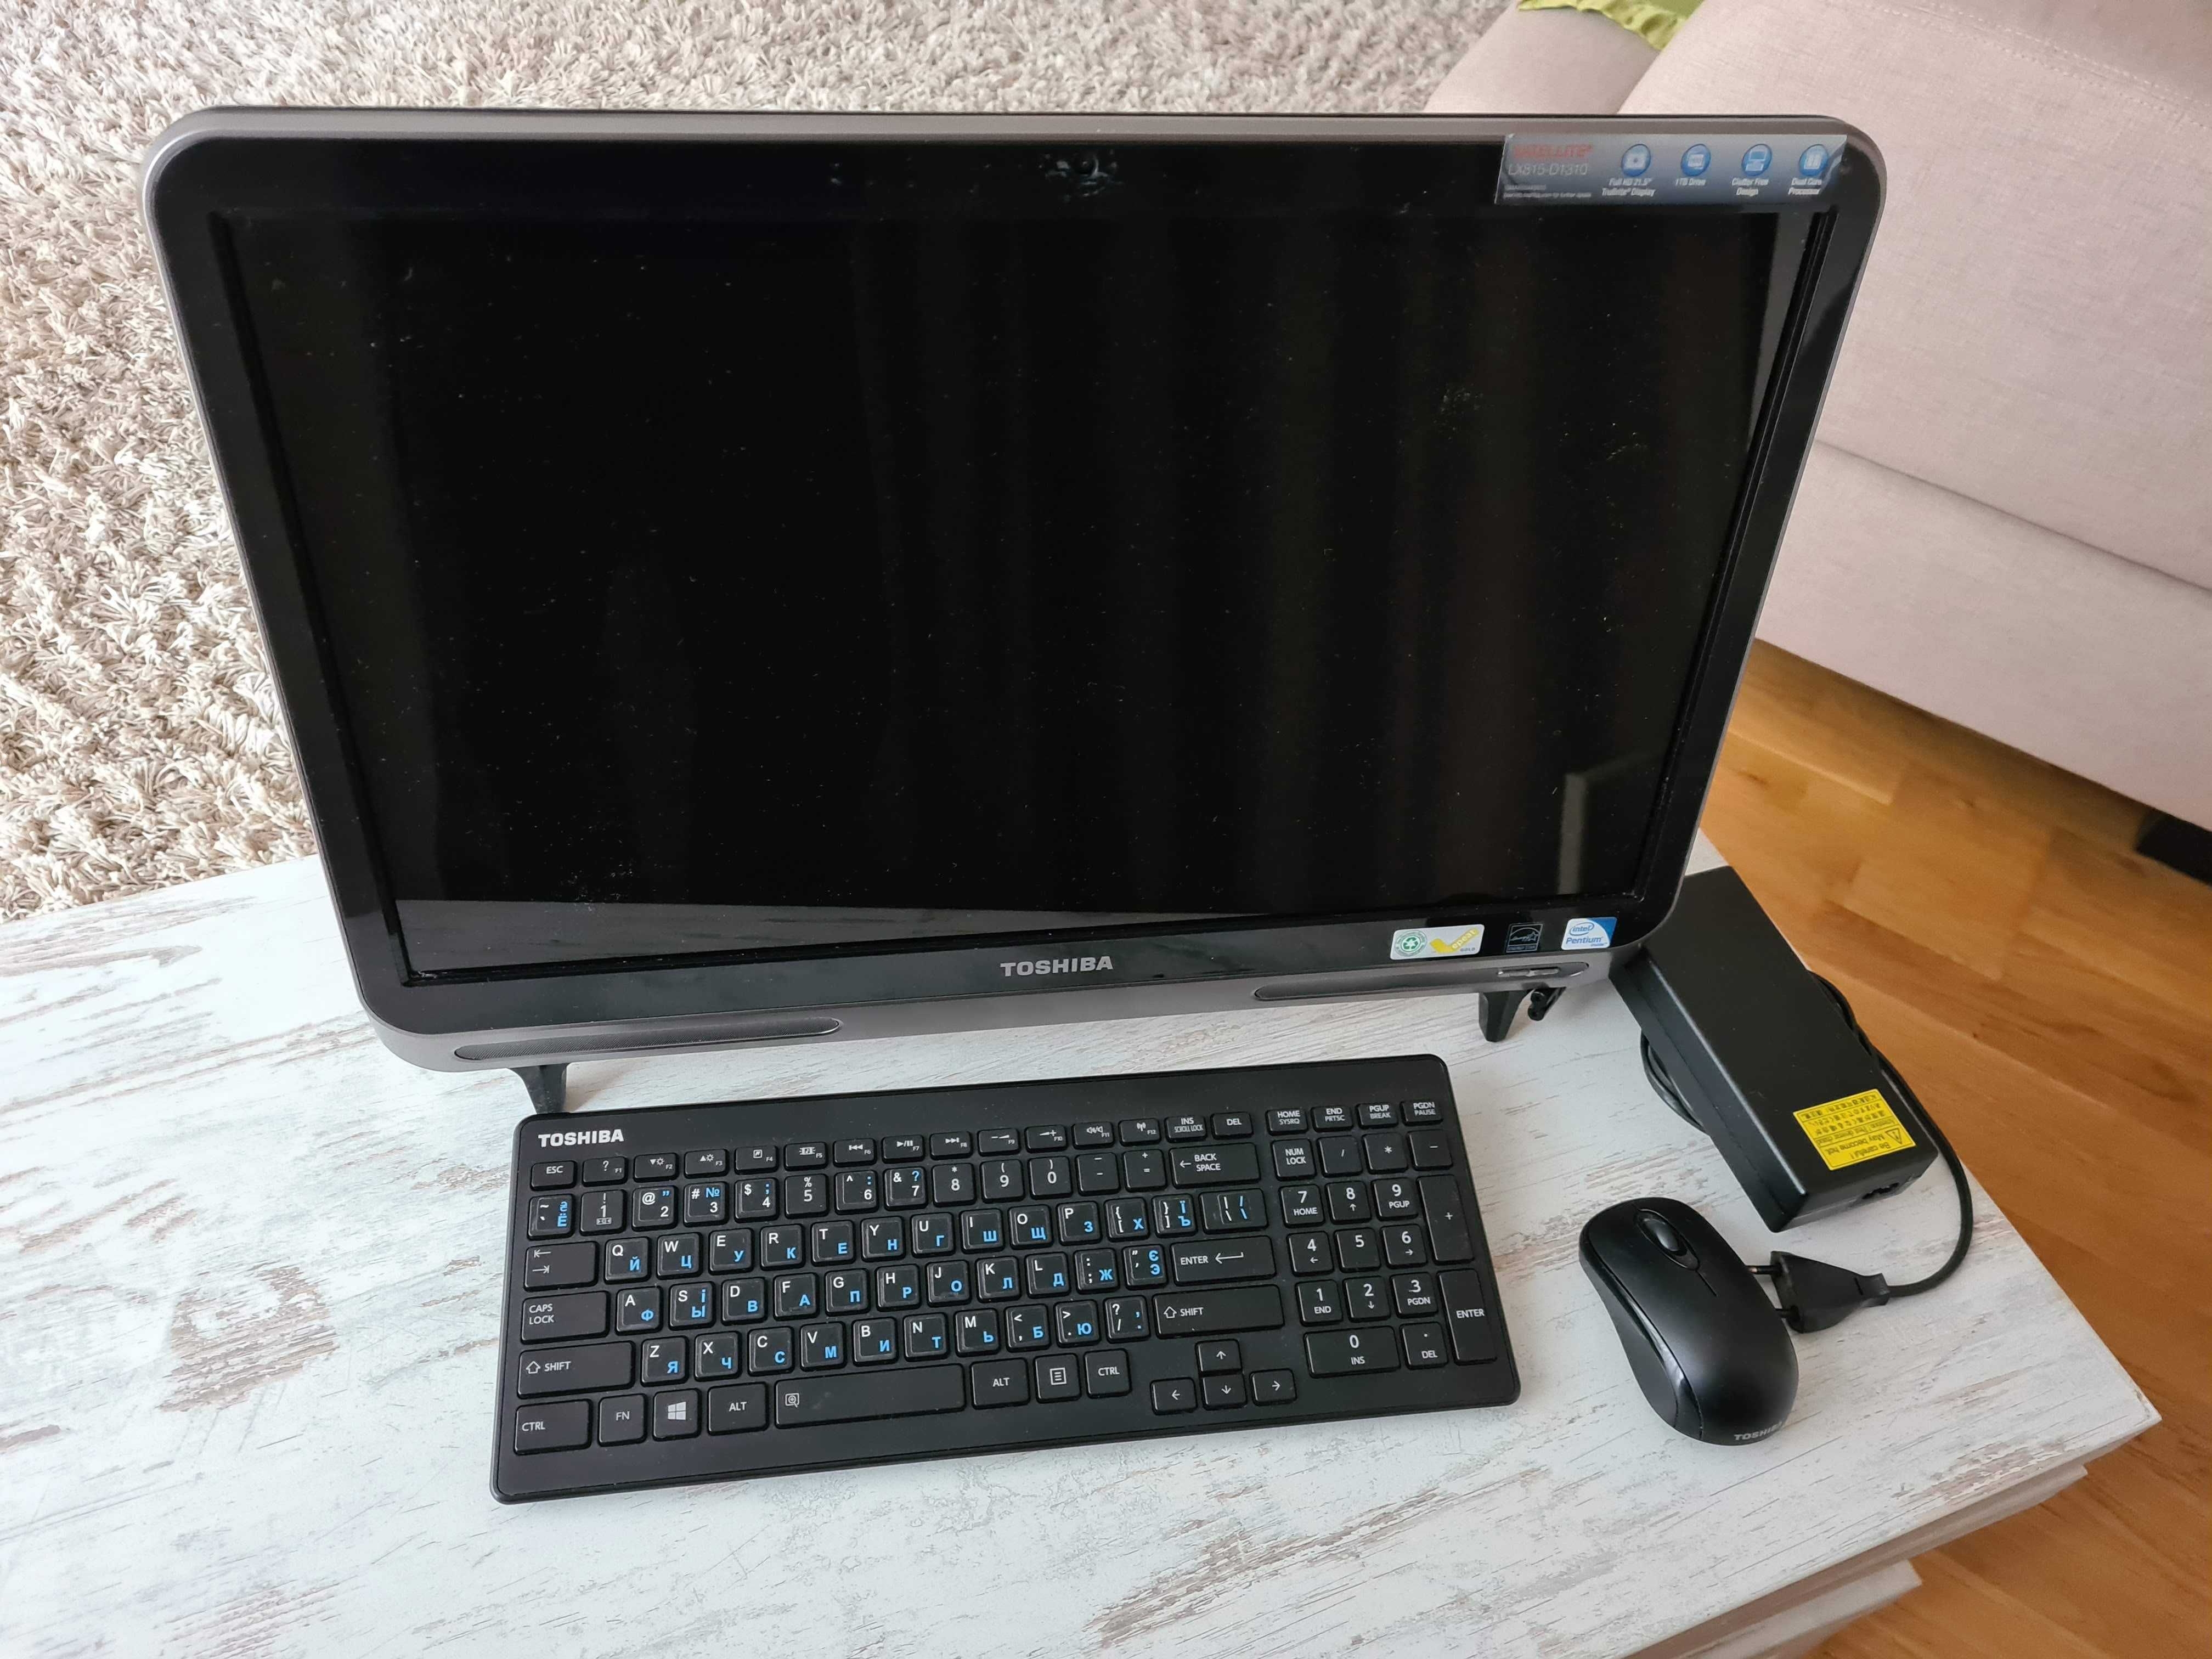 Toshiba LX815-D1310 21" All-in-One Desktop